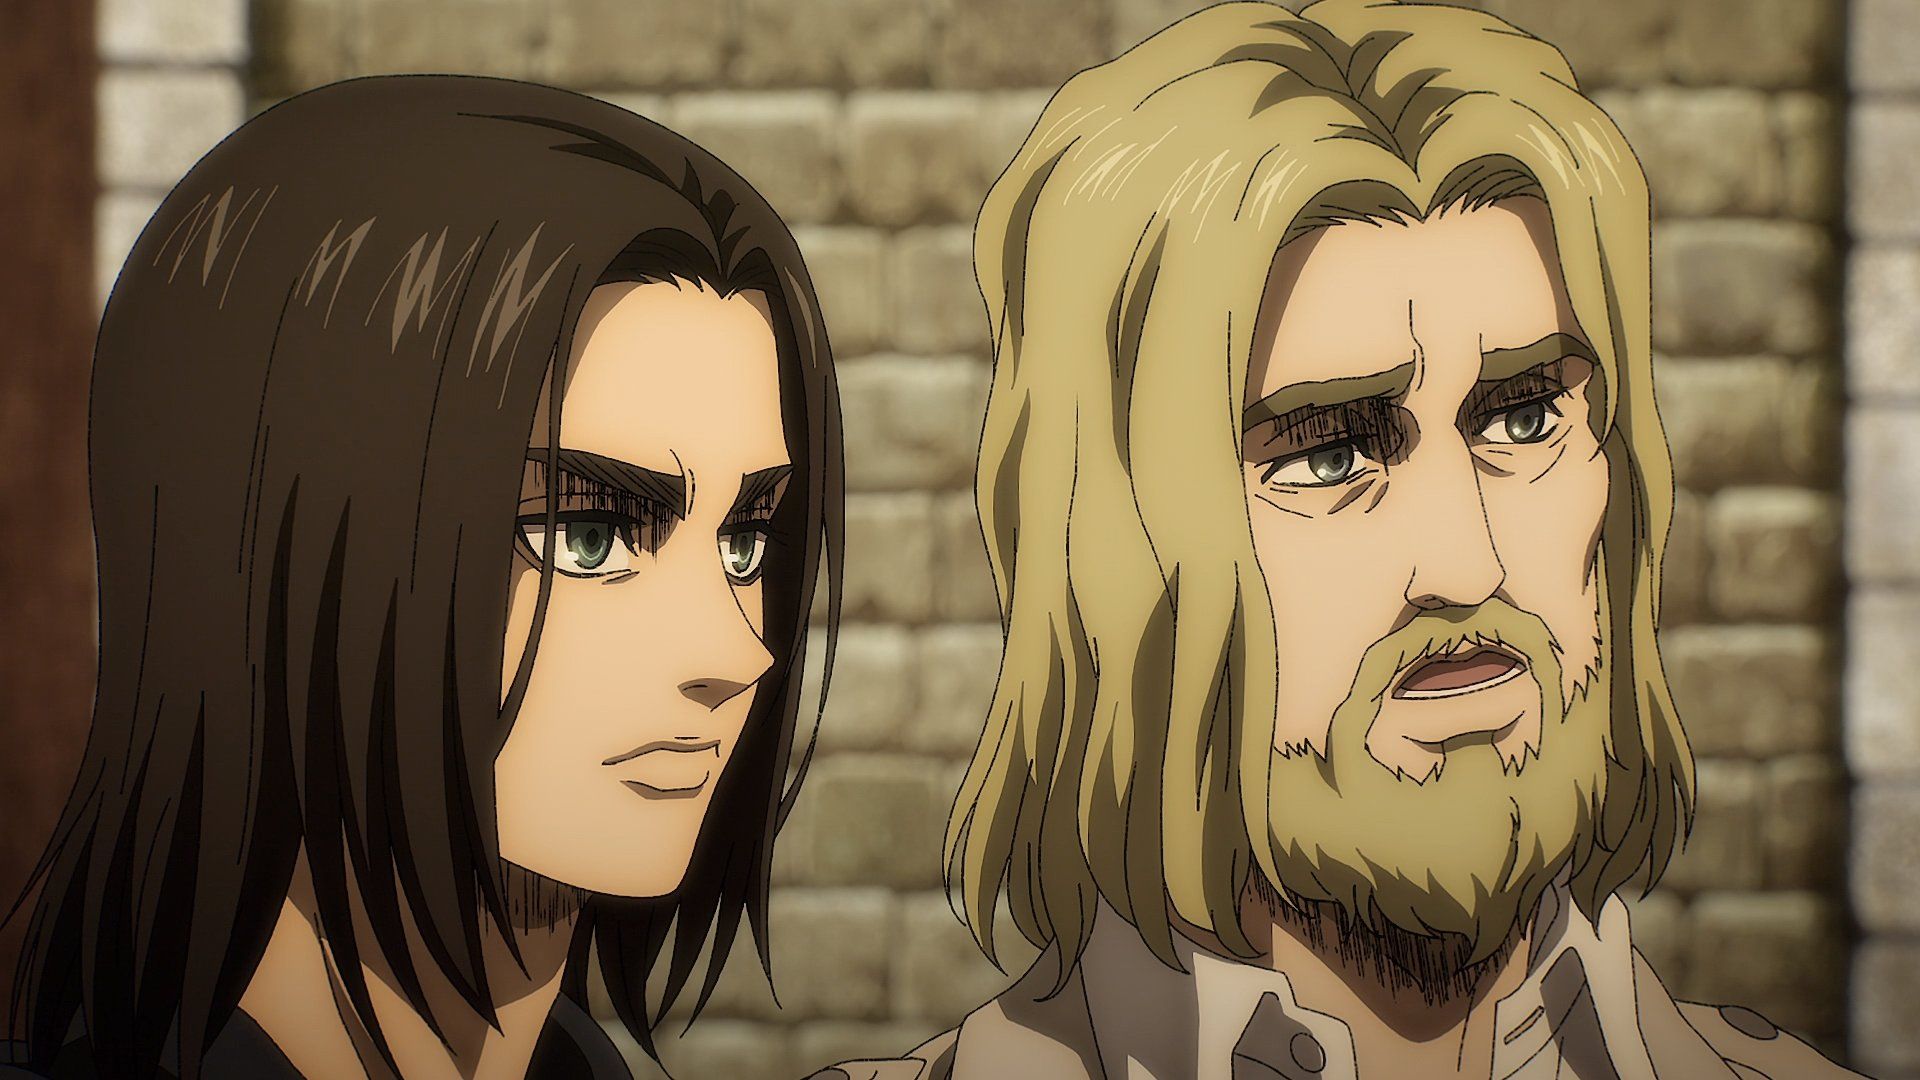 Attack on Titan Season 4 Part 2 Episode 4 Release Date And Where To Watch?